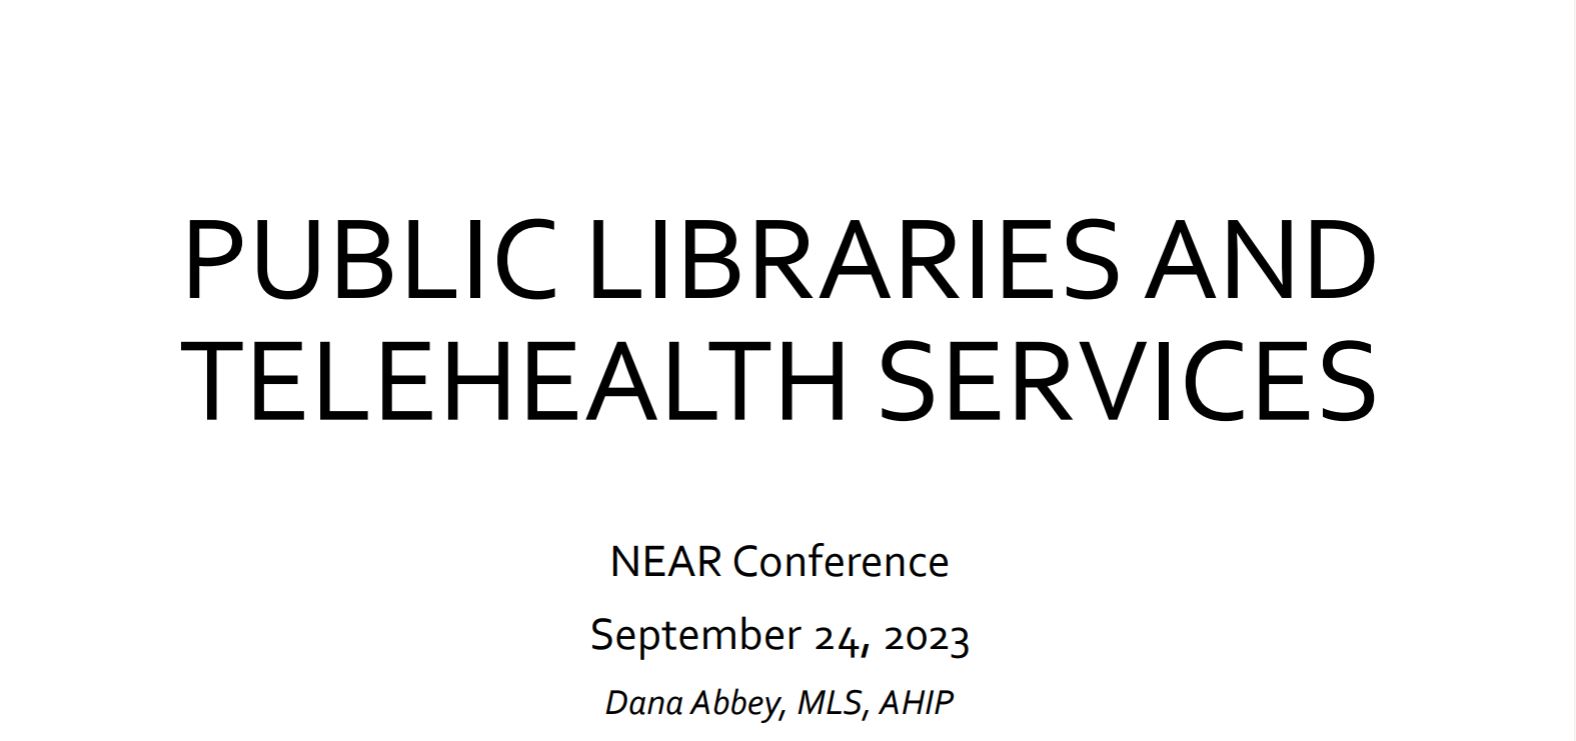 Public Libraries and Telehealth Services